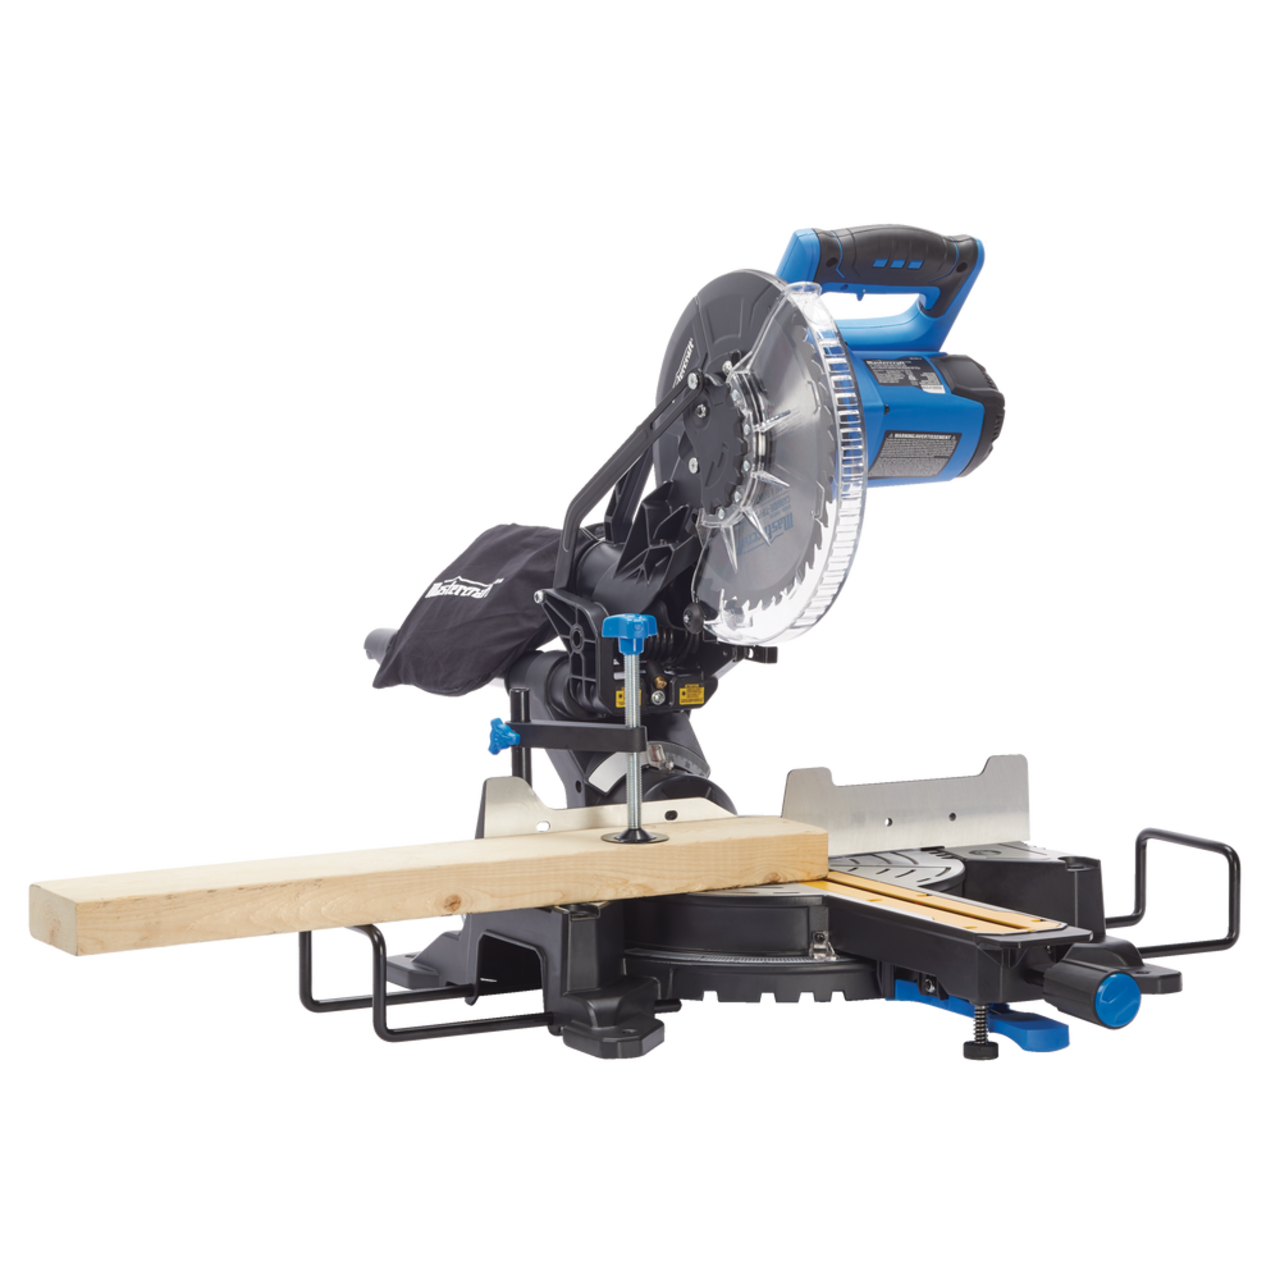 https://media-www.canadiantire.ca/product/fixing/tools/stationary-tools/0556751/mastercraft-10-sliding-mitre-saw-06707220-8cd5-4745-8a62-621ebef8aef0.png?imdensity=1&imwidth=640&impolicy=mZoom